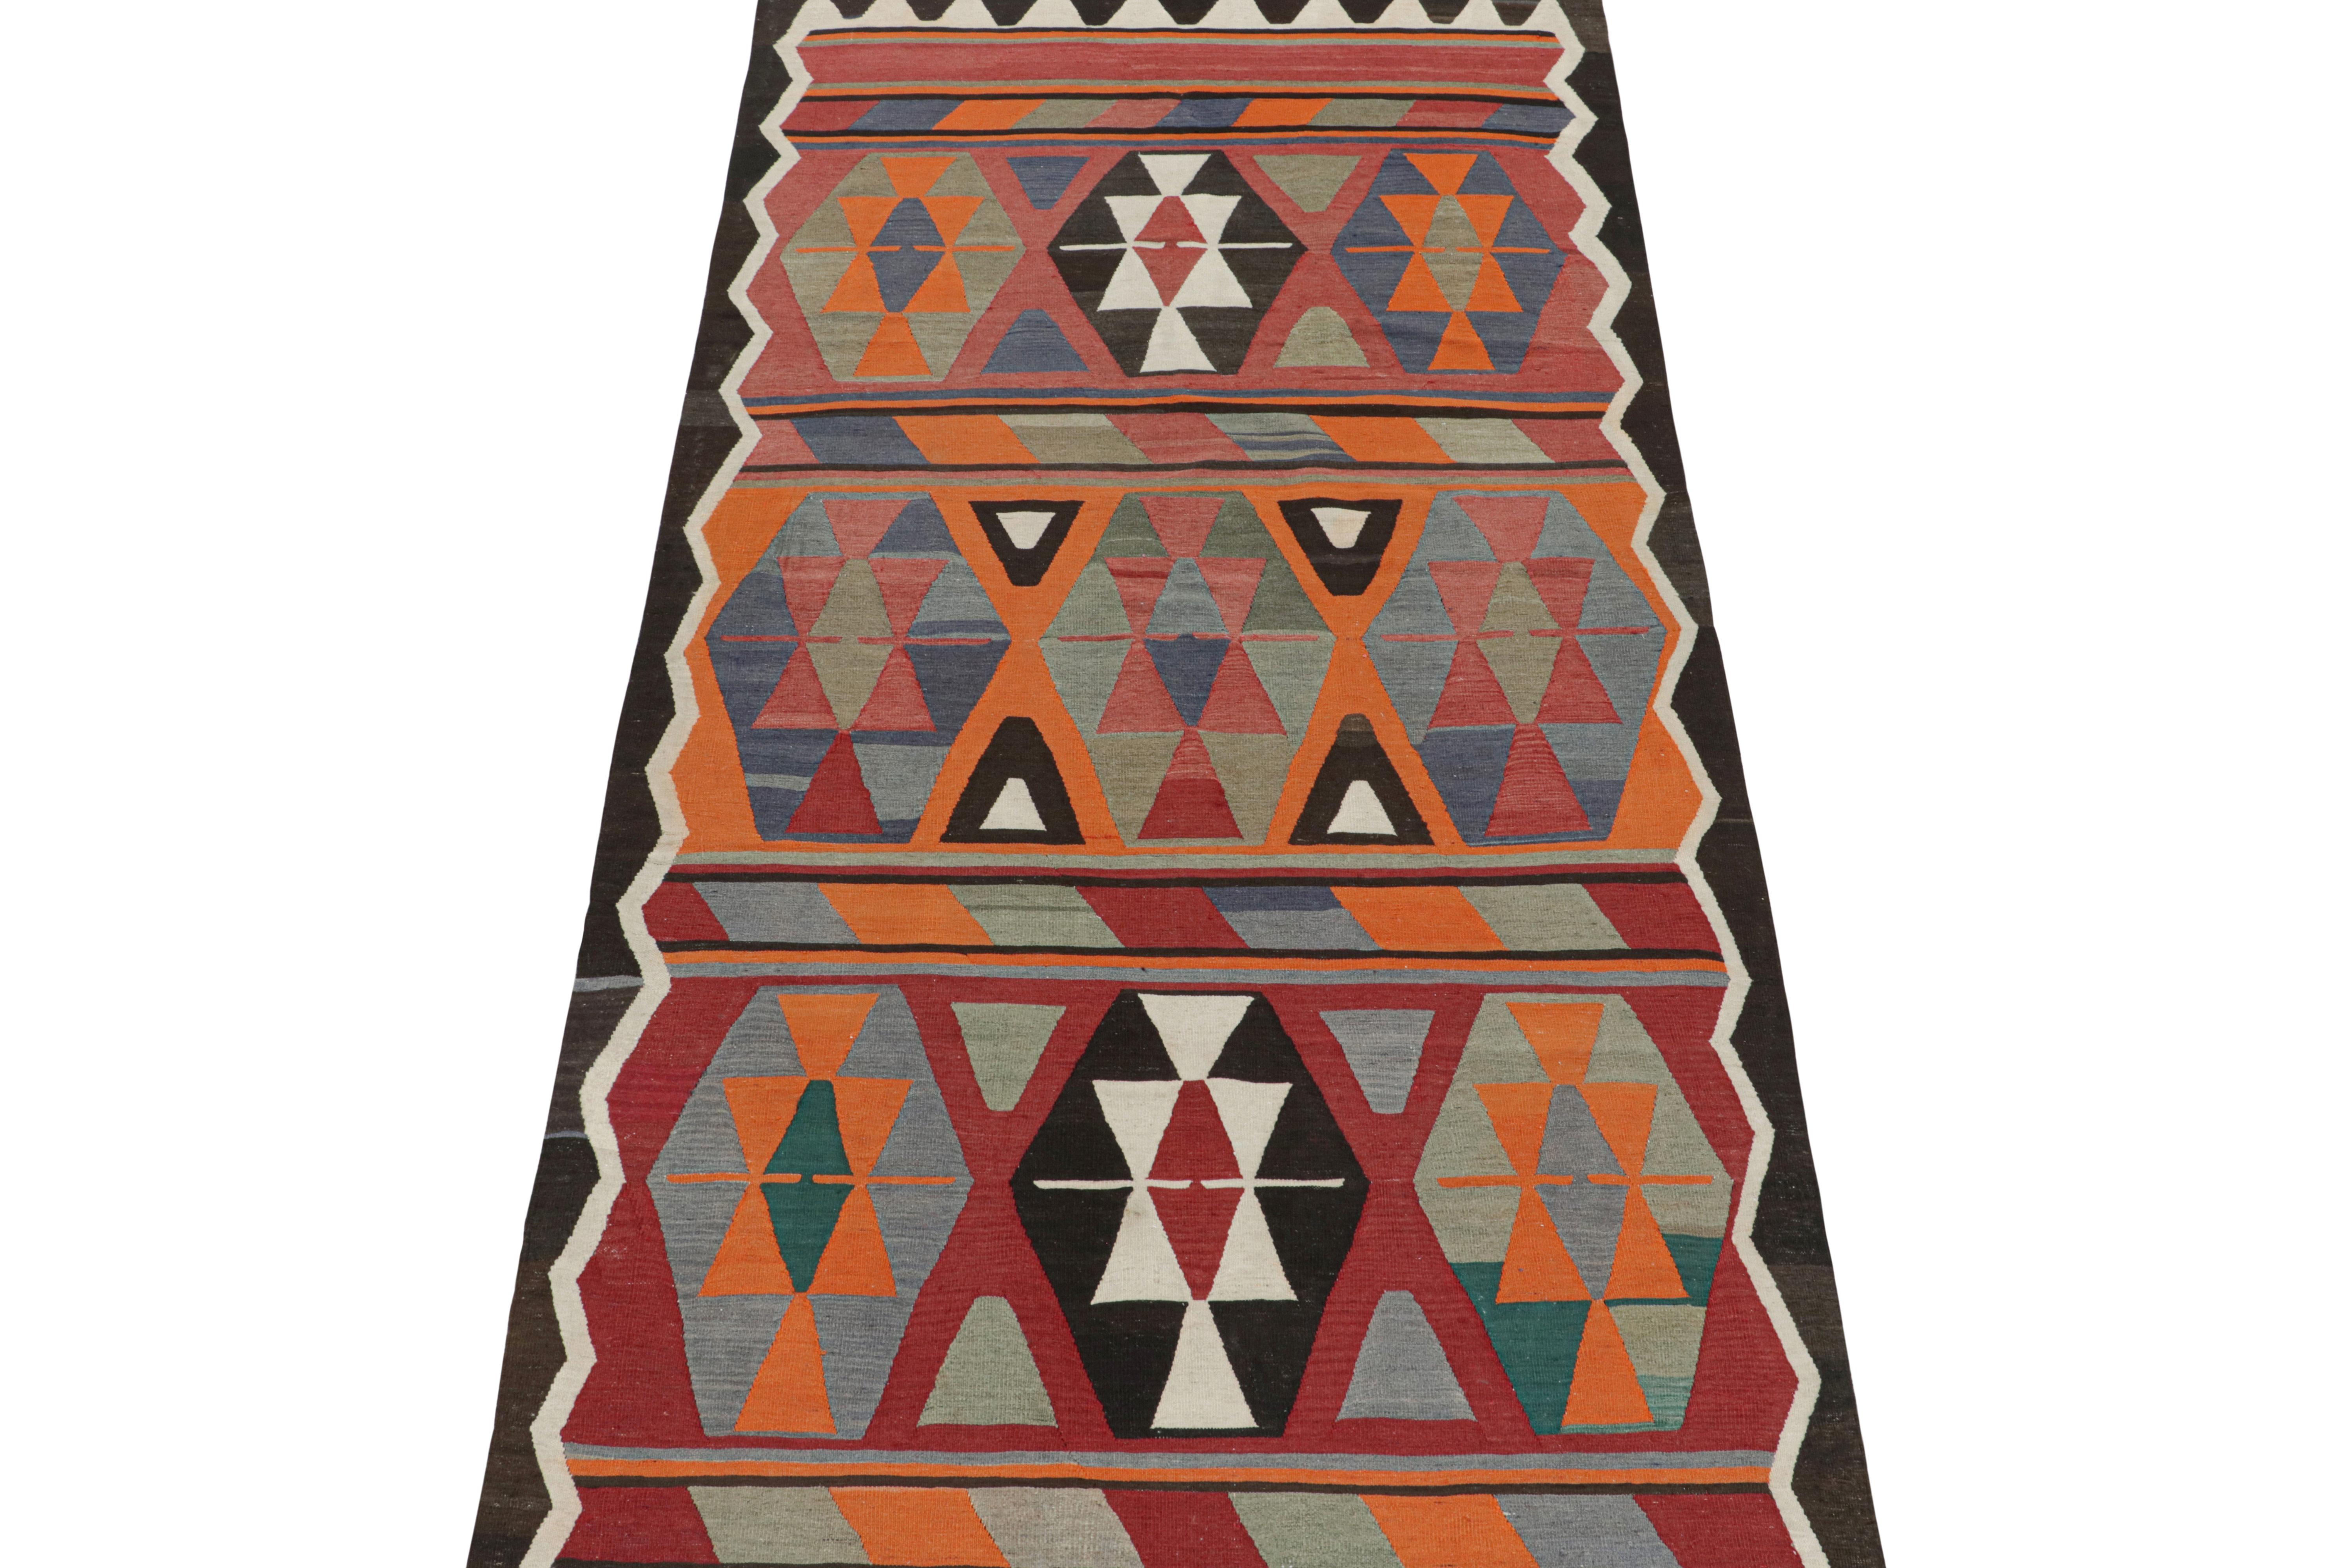 This vintage 5x11 Persian Kilim runner is handwoven in wool and originates circa 1950-1960. This Kilim is believed to hail from Meshkin—a small village known for its craft among what connoisseurs call 